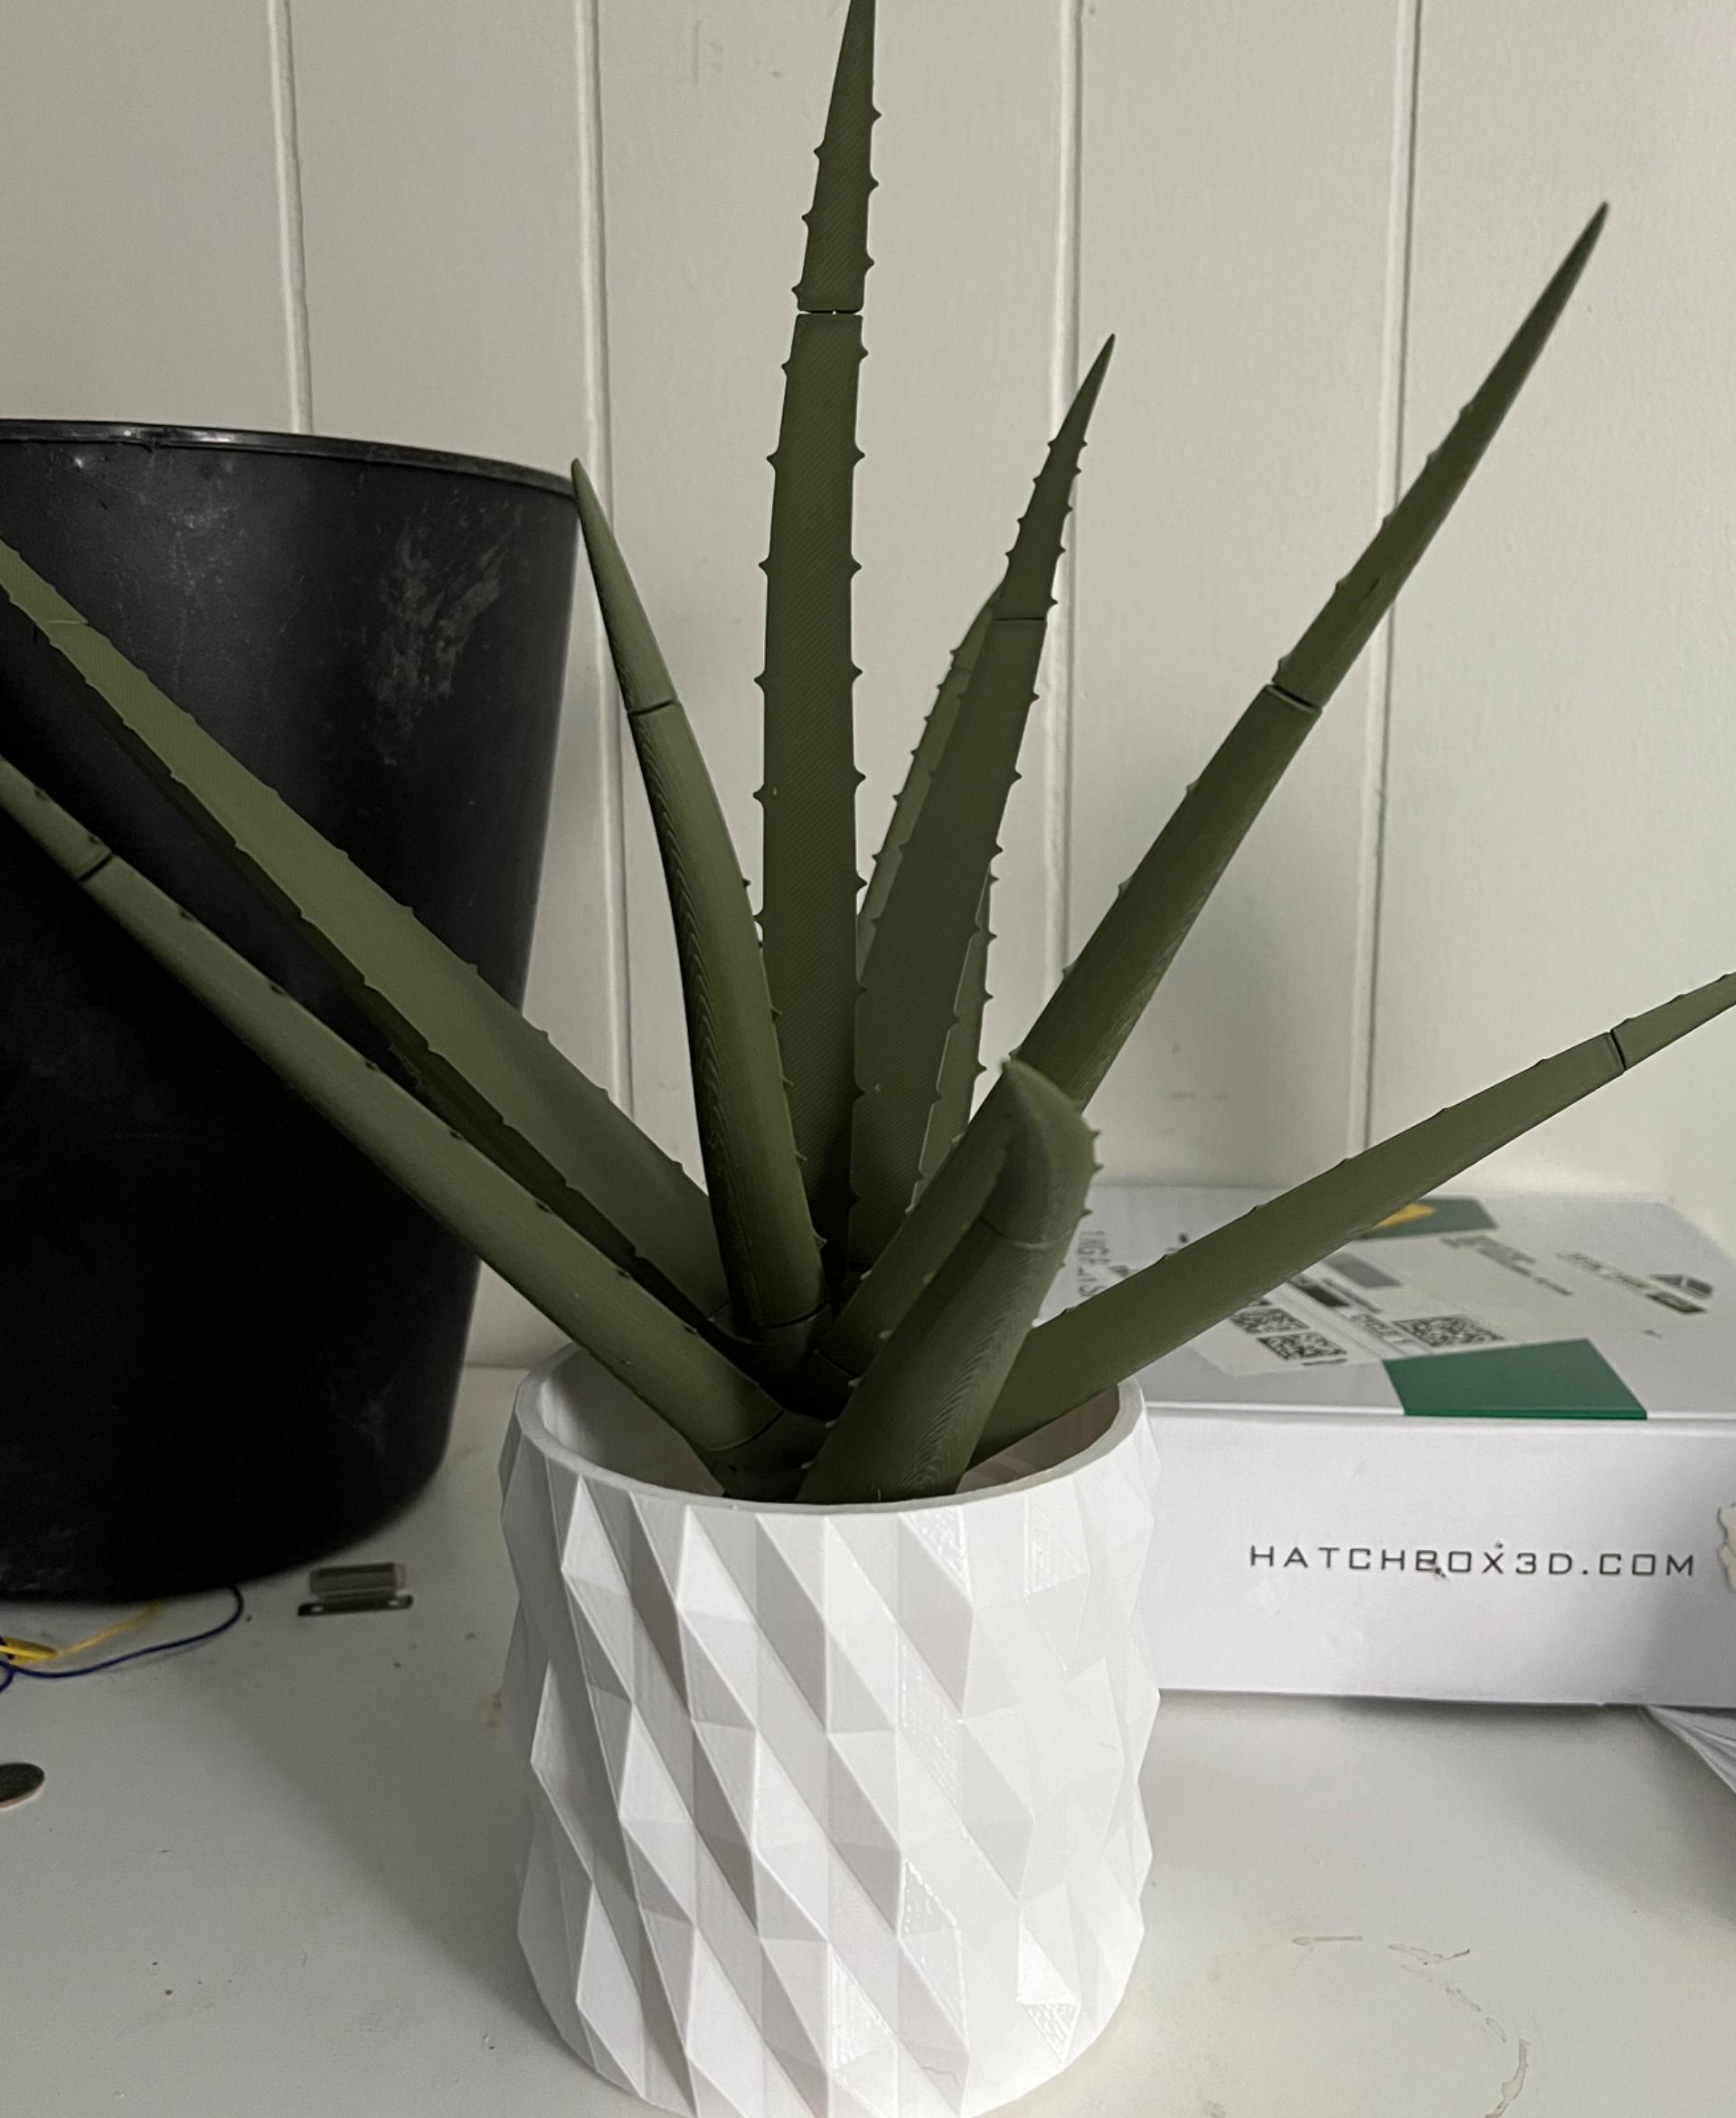 Aloe Vera Pen Plant - Printed with Hatchbox white pla and Eryone olive green pla. Opted to paint the spots on later tos ave filament. I didn’t have any red clay-like filament so I made my own white geometric planter that I scaled to fit the insert in blender. 
Tips: Hit the stem holes with a heat gun on low for maybe 10 secs each to make it easier to get the pens down in them. 
Bore out the caps with a small rasp/file or exactly knife for a better fit. I’ve still got a few to fine tune. 
Once you get magnets in the base, give each installed magnet a pair and mark the outward face with a sharpie so you don’t install it wrong into the stem. 
Use a flat surface on a pair of pliers to persuade the magnets into the holes easier. 
If you dial in your printer this all fits together very well! I printed mine across an A1, an A1 Mini and a K1 Max and everything is fairly snug and lines up well. Great design! Kudos Forge! Thanks for sharing. - 3d model